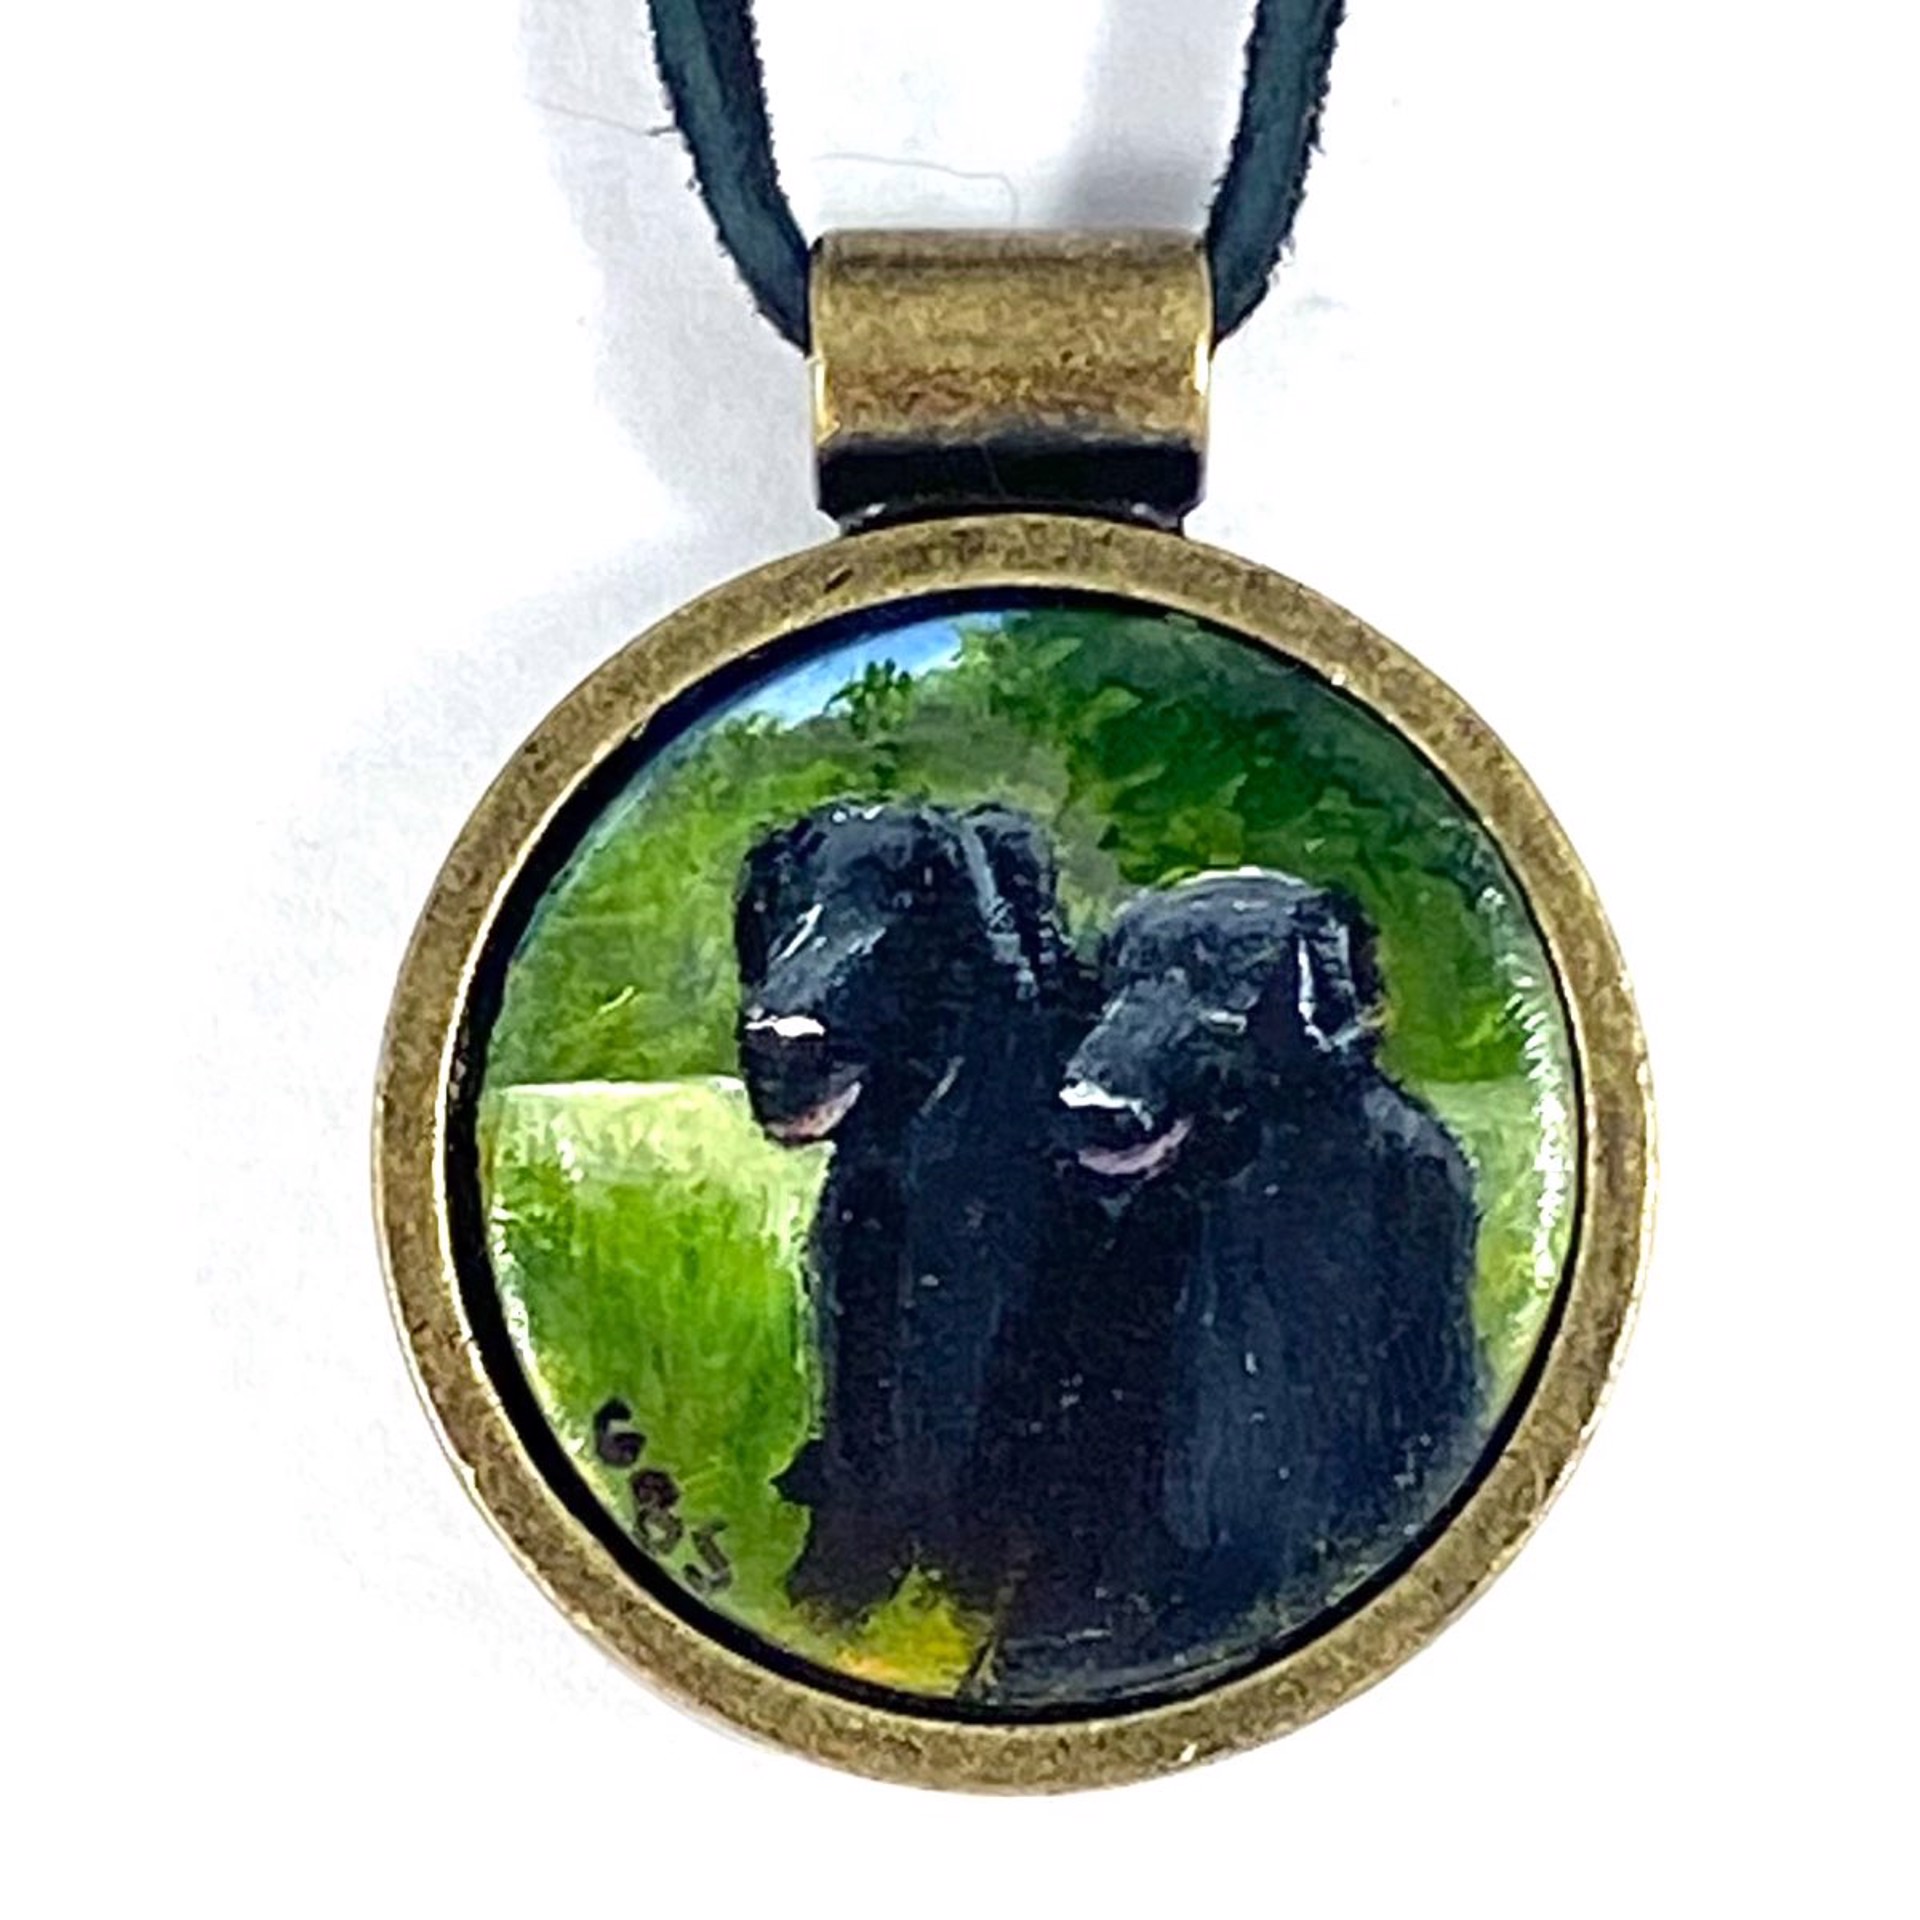 BS22-13 Black Labrador Twins-pendent on leather by Barbara Sawyer